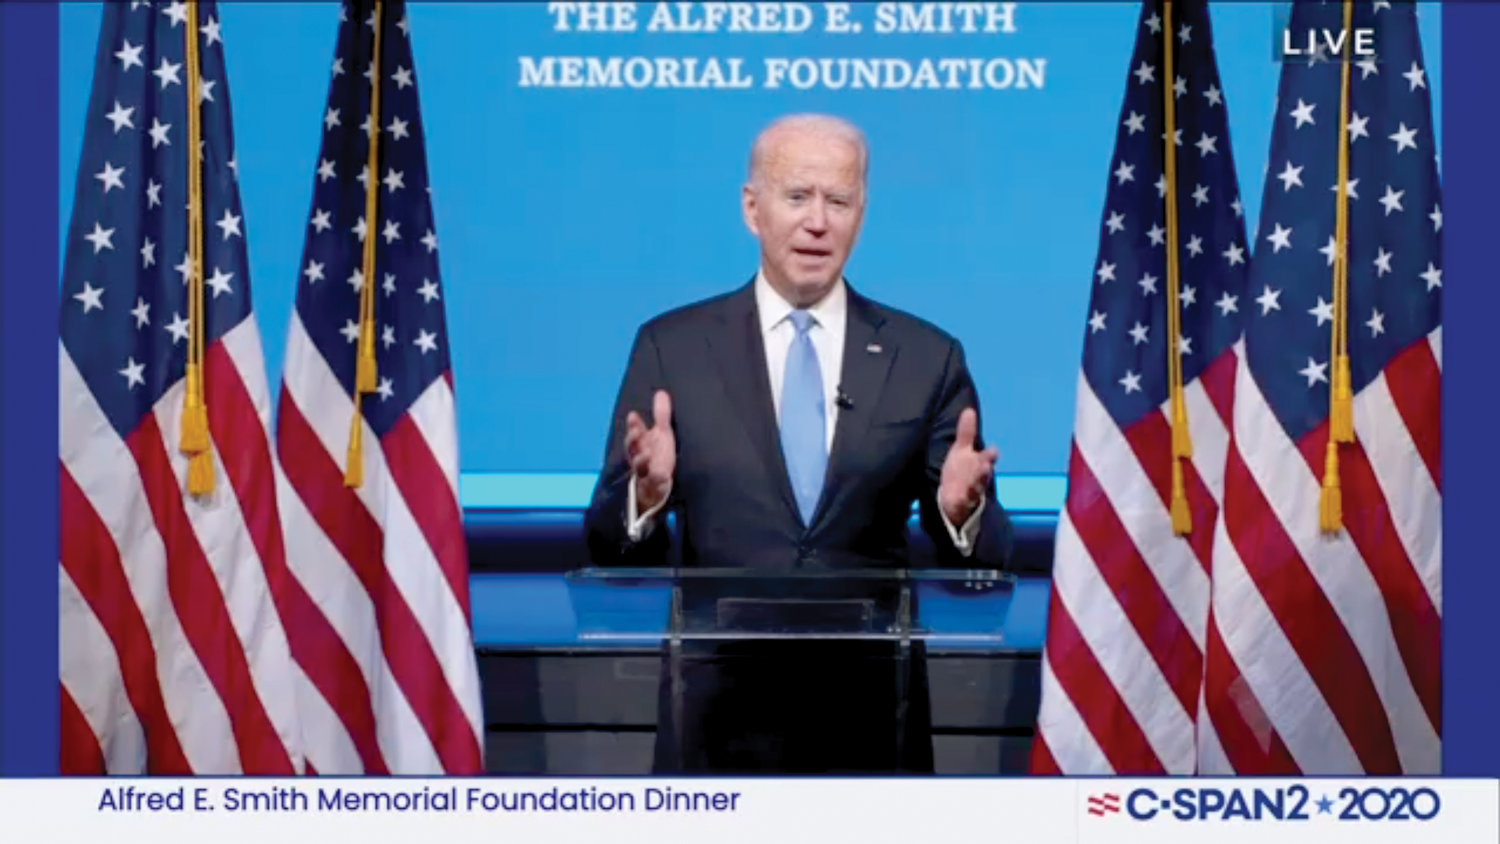 The 75th Annual Alfred E. Smith Memorial Foundation Dinner Virtual Event is livestreamed from the residence of Cardinal Dolan Oct. 1 due to the coronavirus pandemic. Remarks via recorded videos were delivered by President Donald J. Trump, and former Vice President Joseph R. Biden, the candidates in next month’s presidential election.